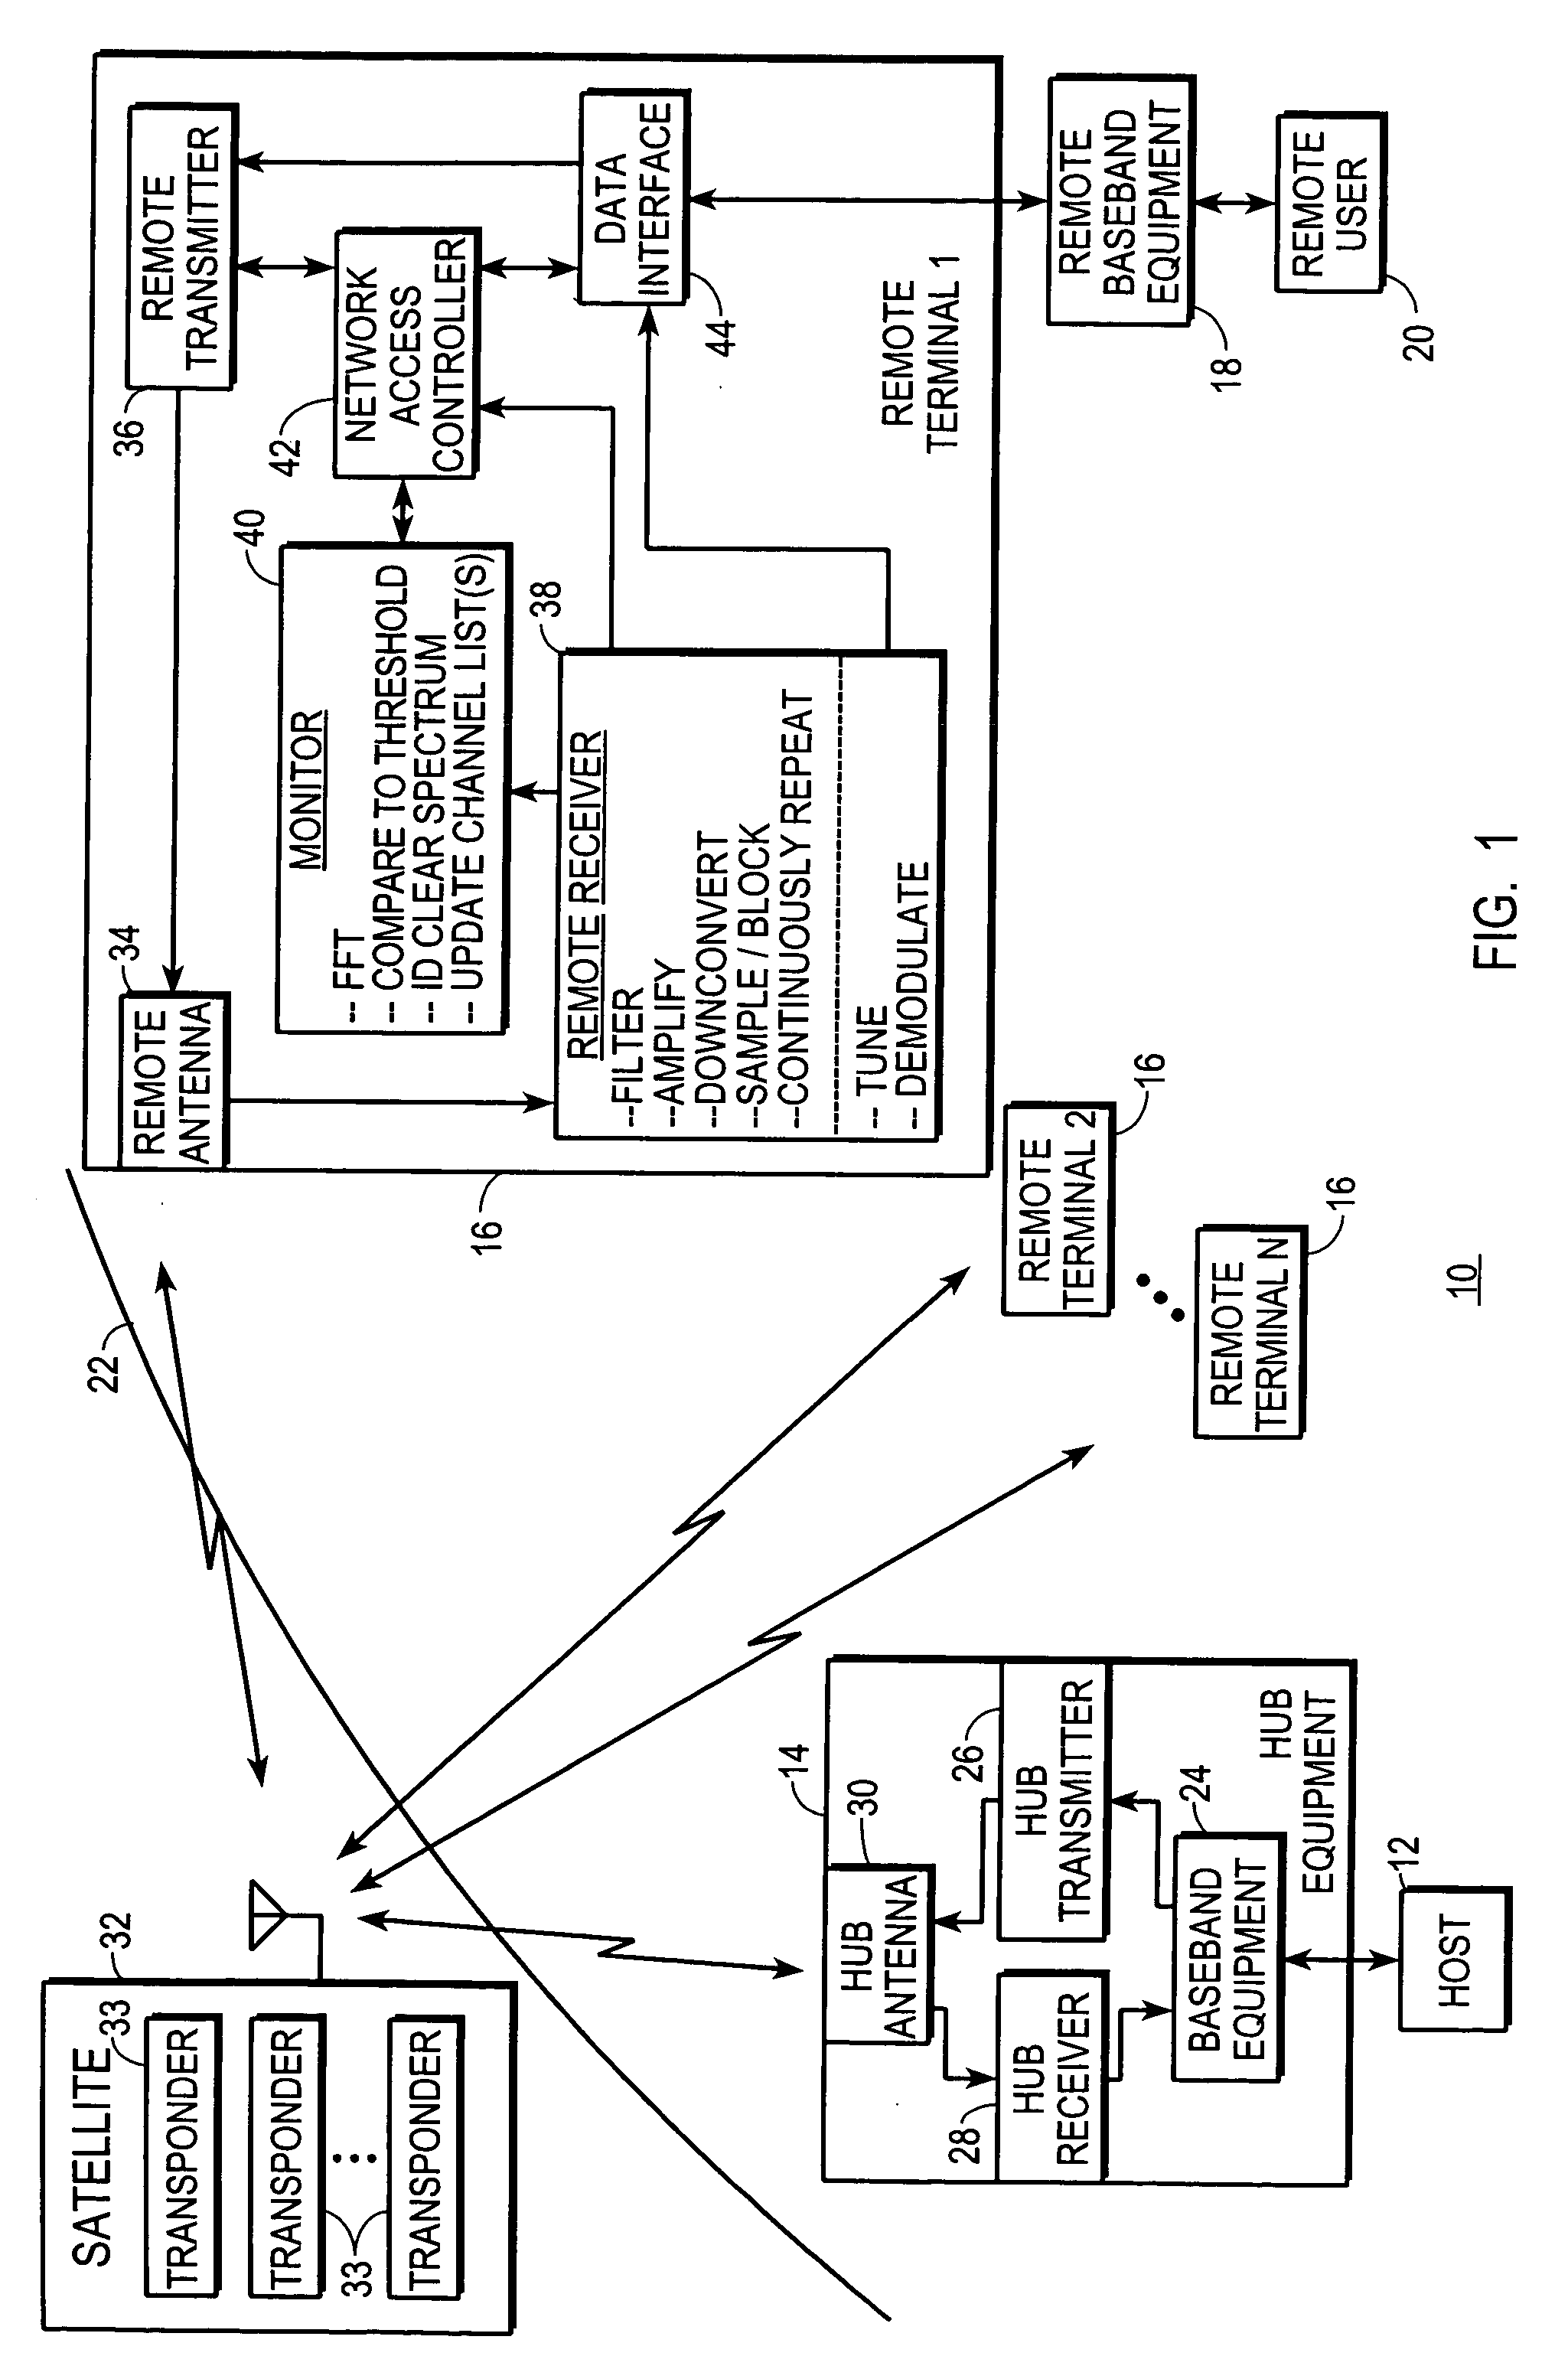 System and method for multiple access control in satellite communications system